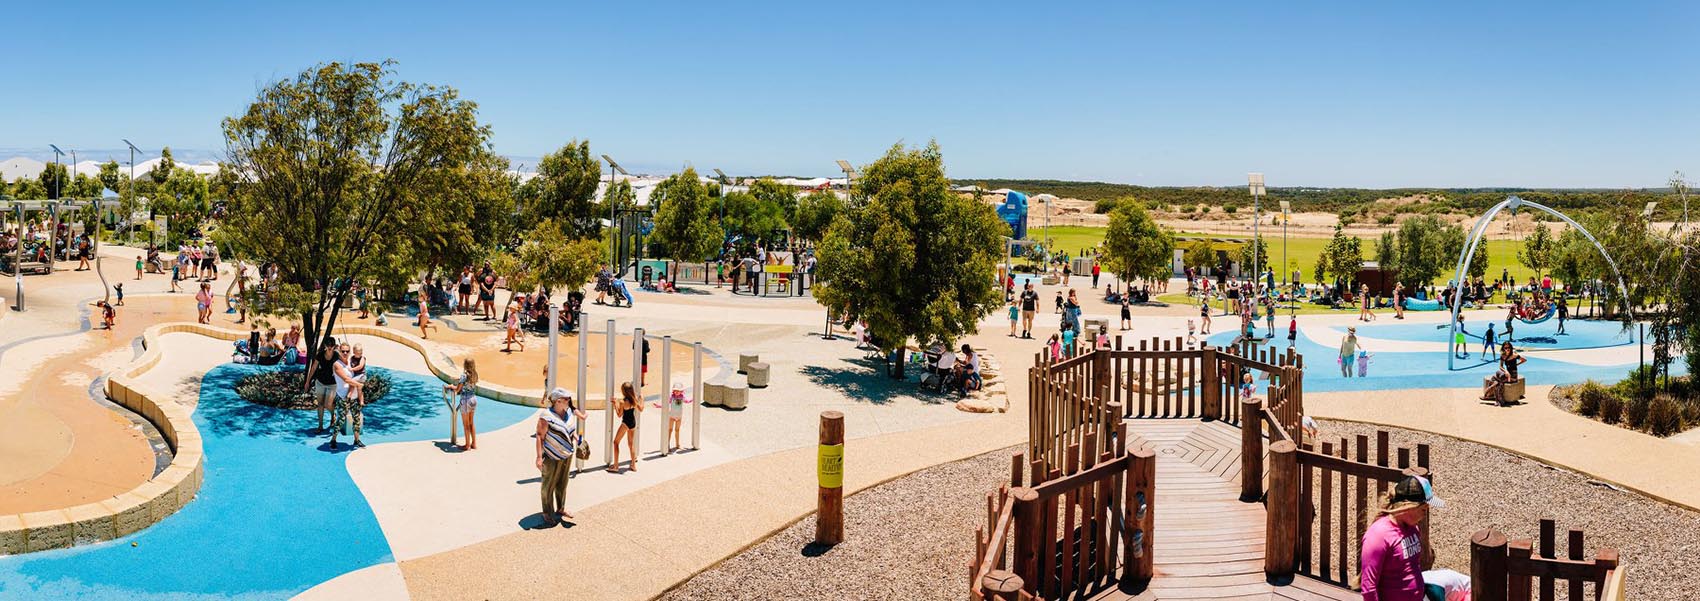 Eglinton's Kinkuna Park is one of Perth's best parks and playgrounds